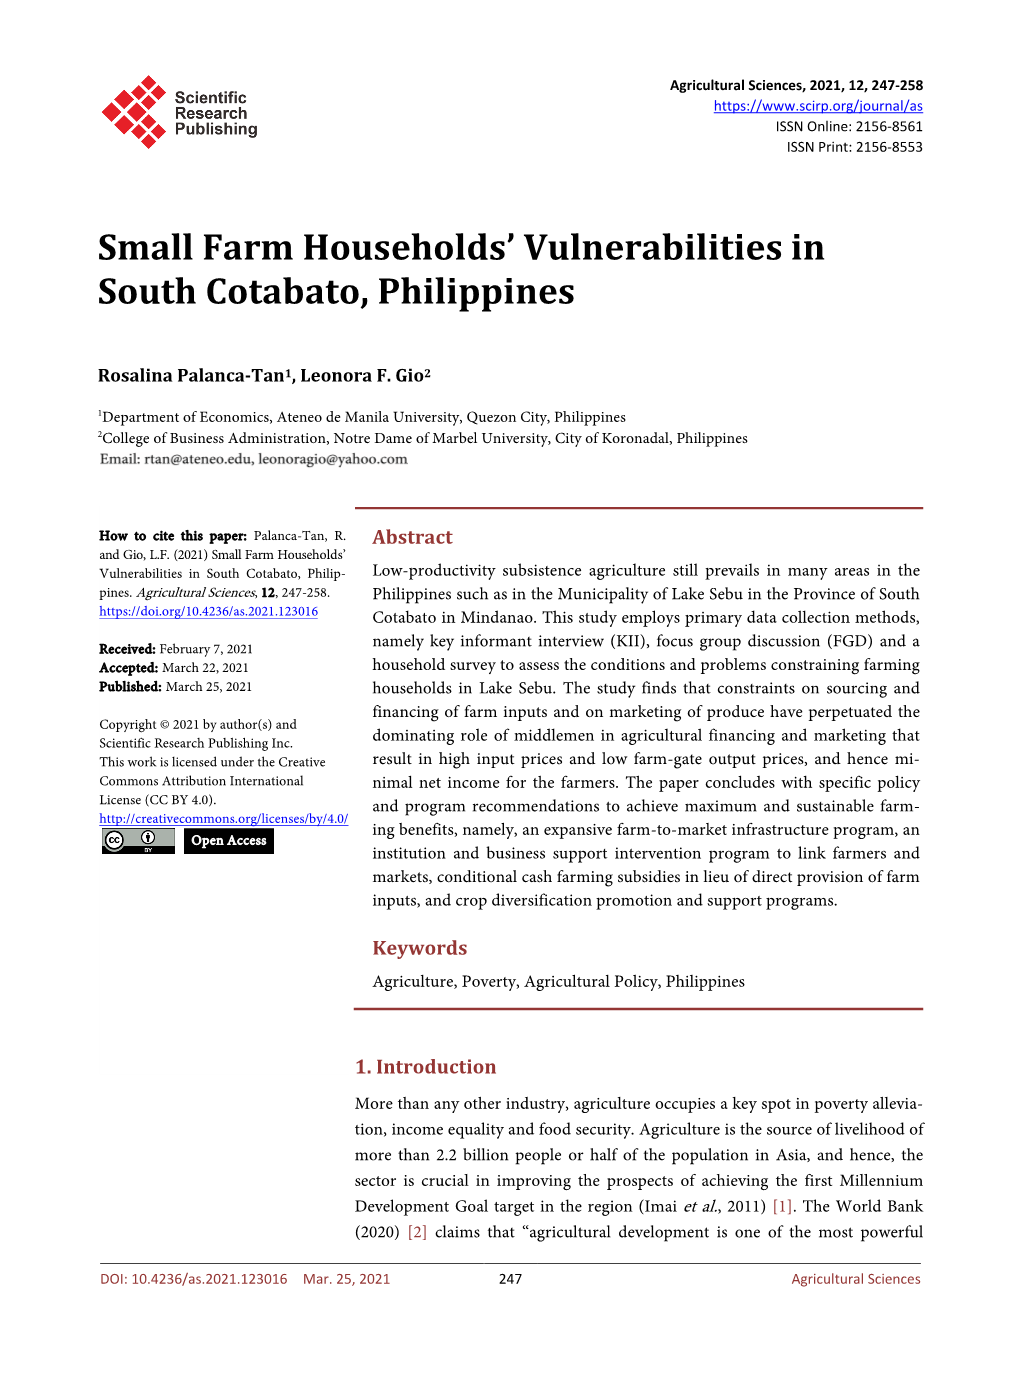 Small Farm Households' Vulnerabilities in South Cotabato, Philippines